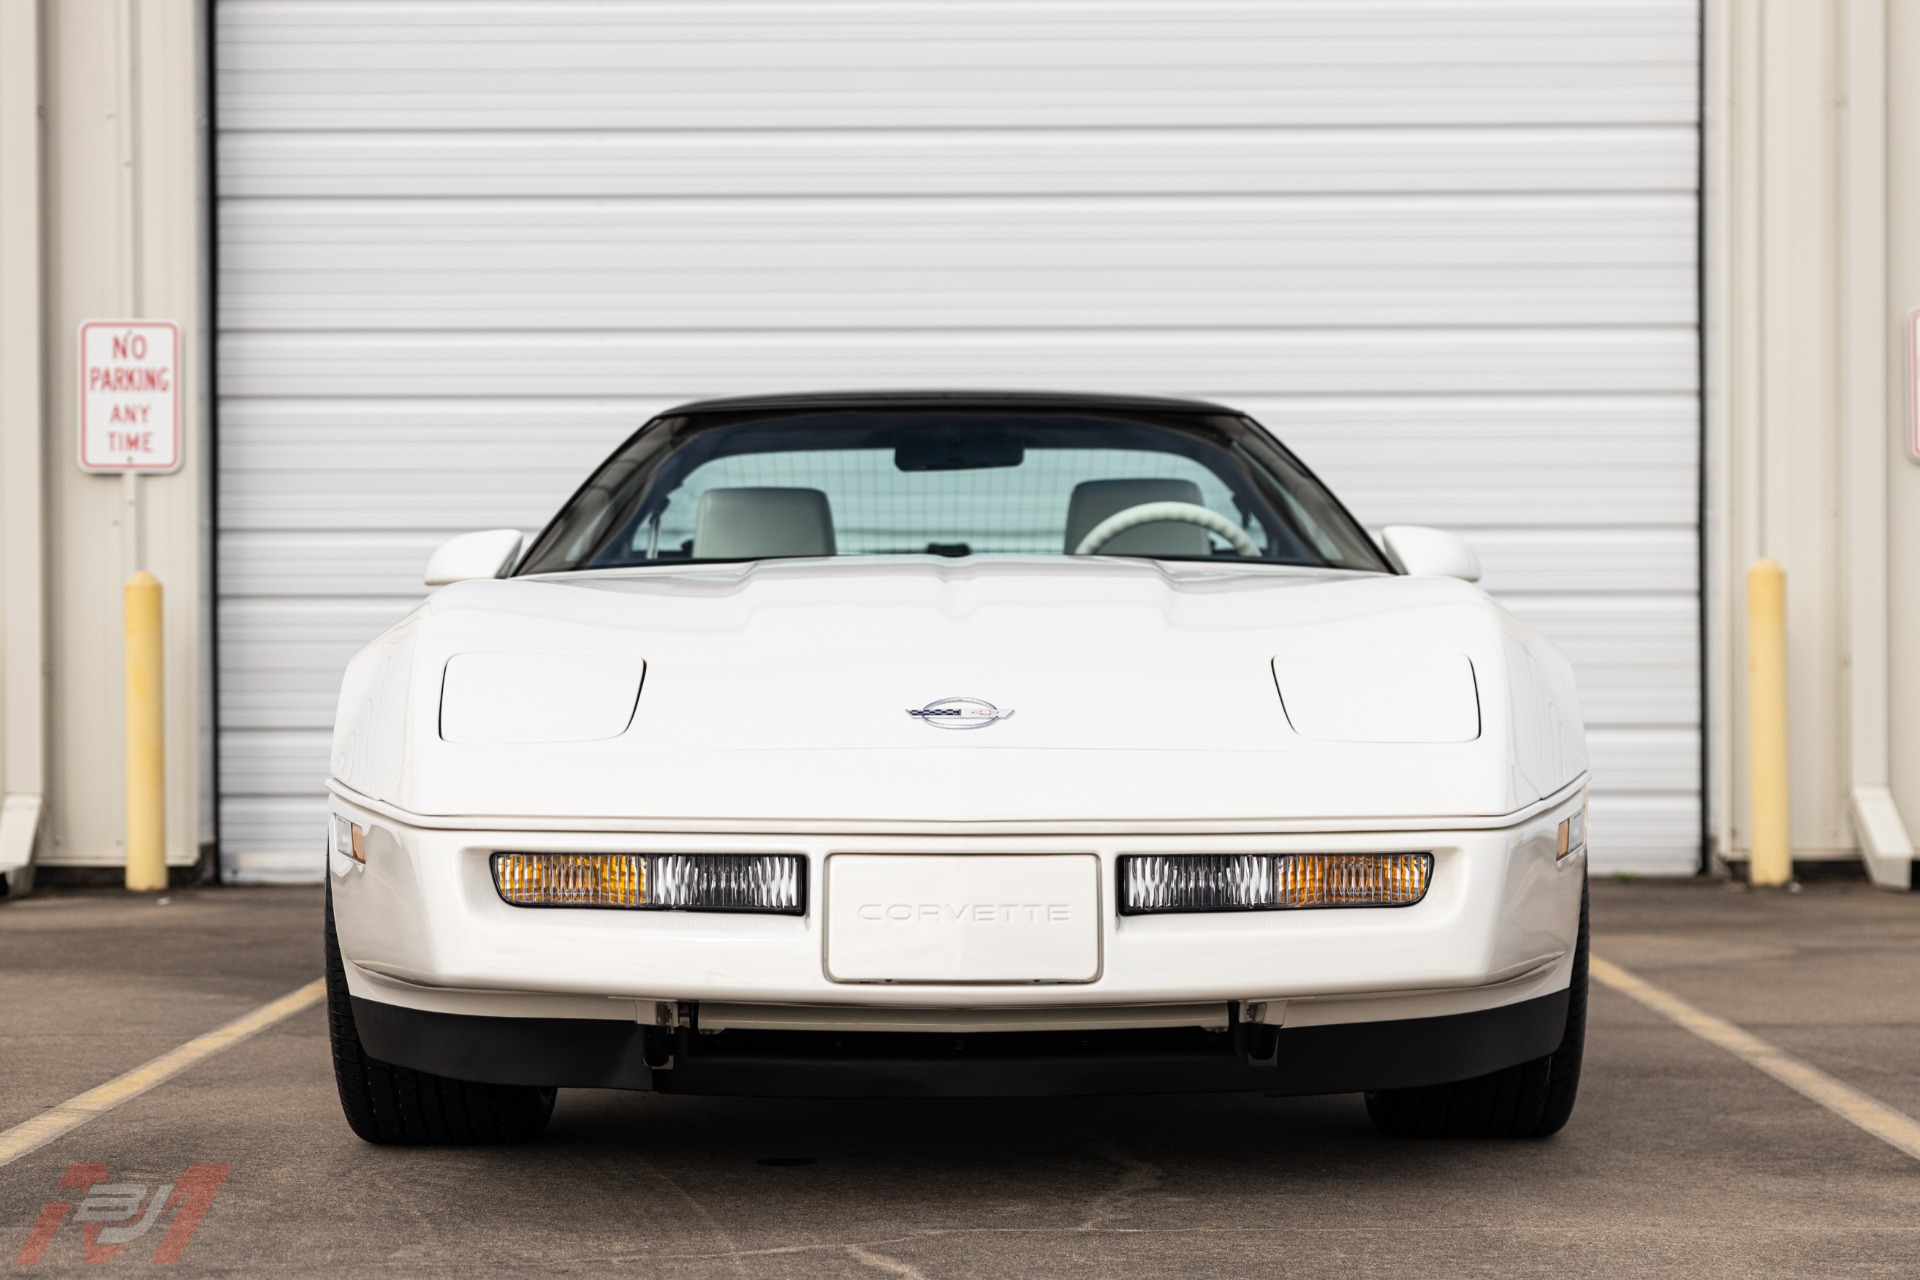 Used-1988-Chevrolet-Corvette-35th-Anniversary-with-491-miles